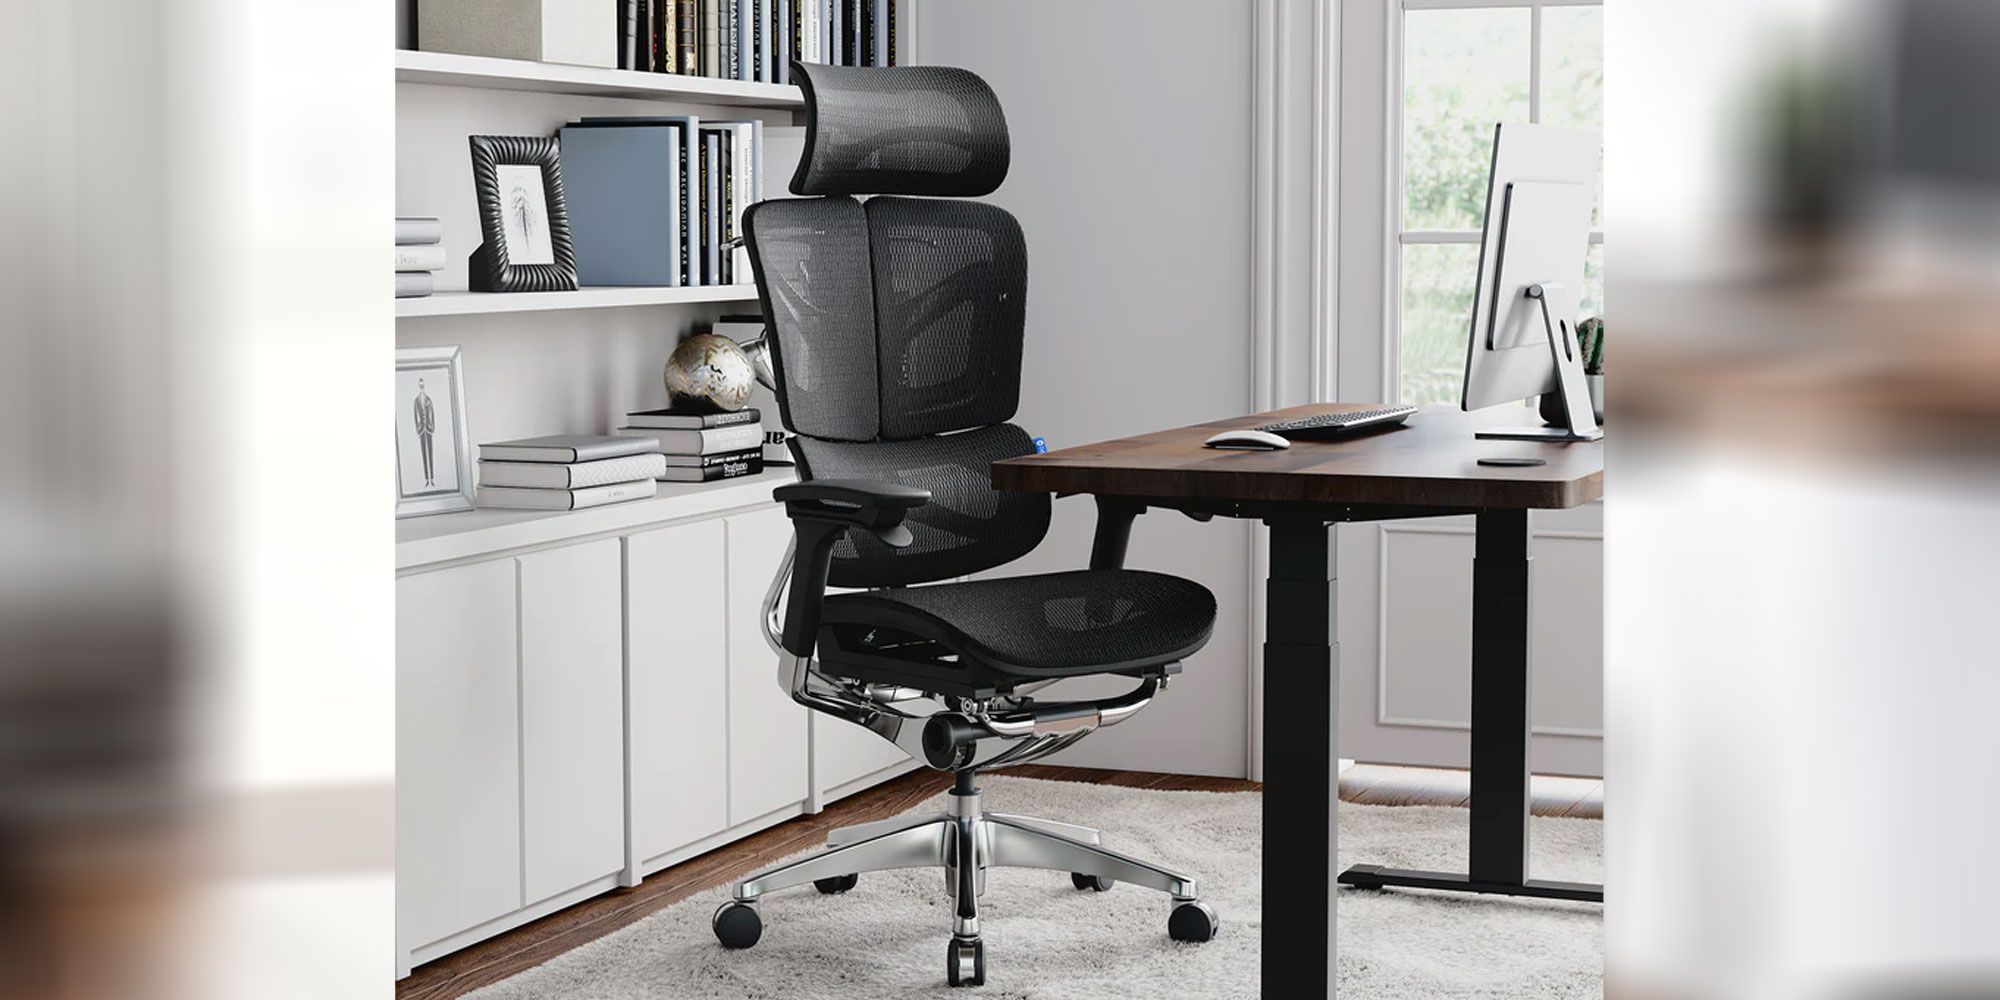 Ergo Butterfly chair in an office with a bookshelf and desk. 